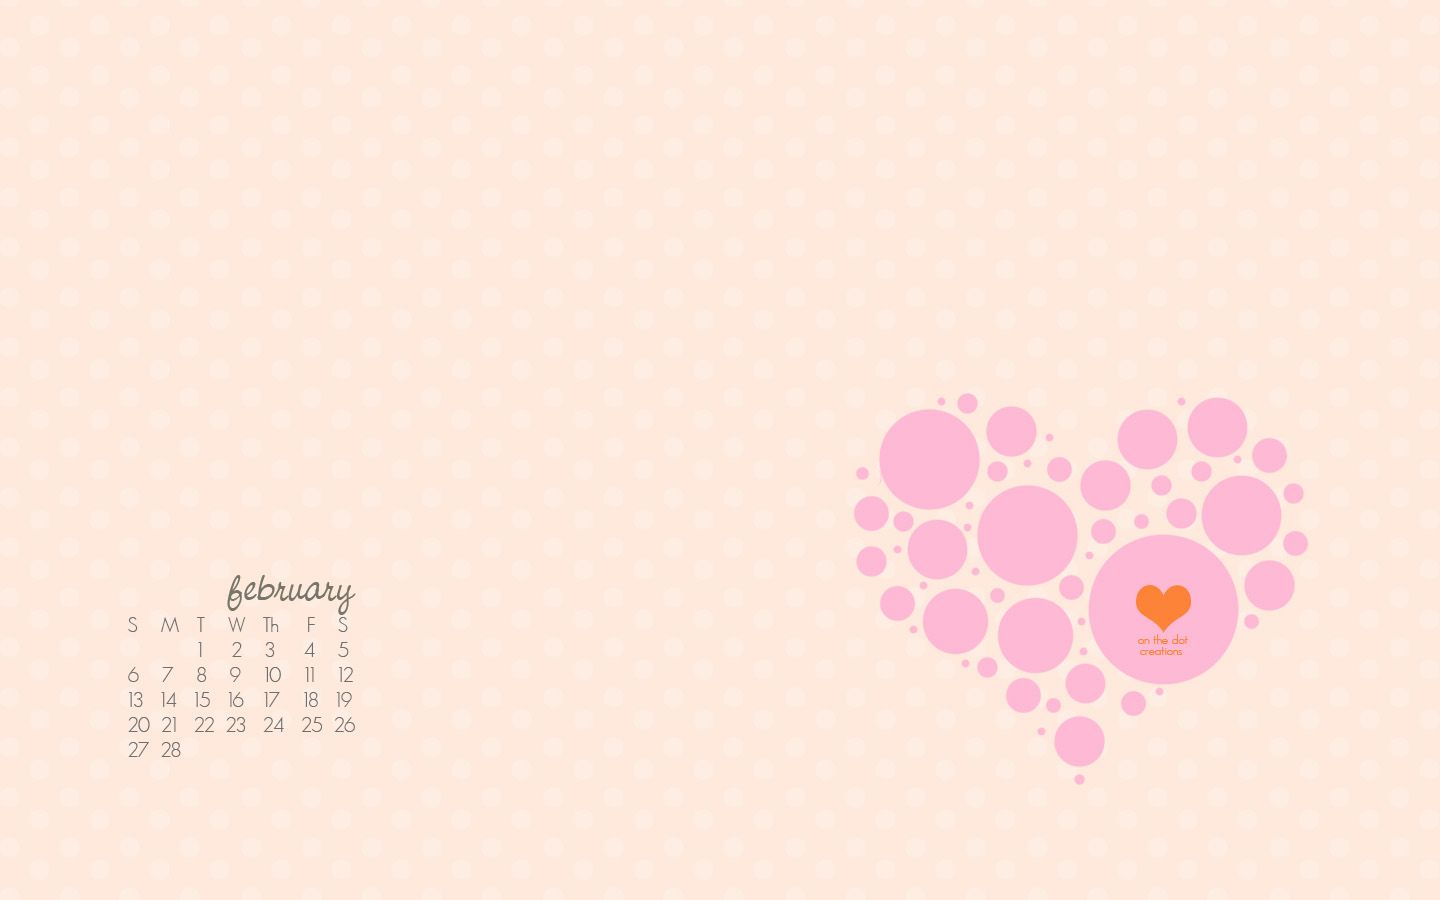 A February 2011 Desktop Wallpaper for You » On the Dot Creations